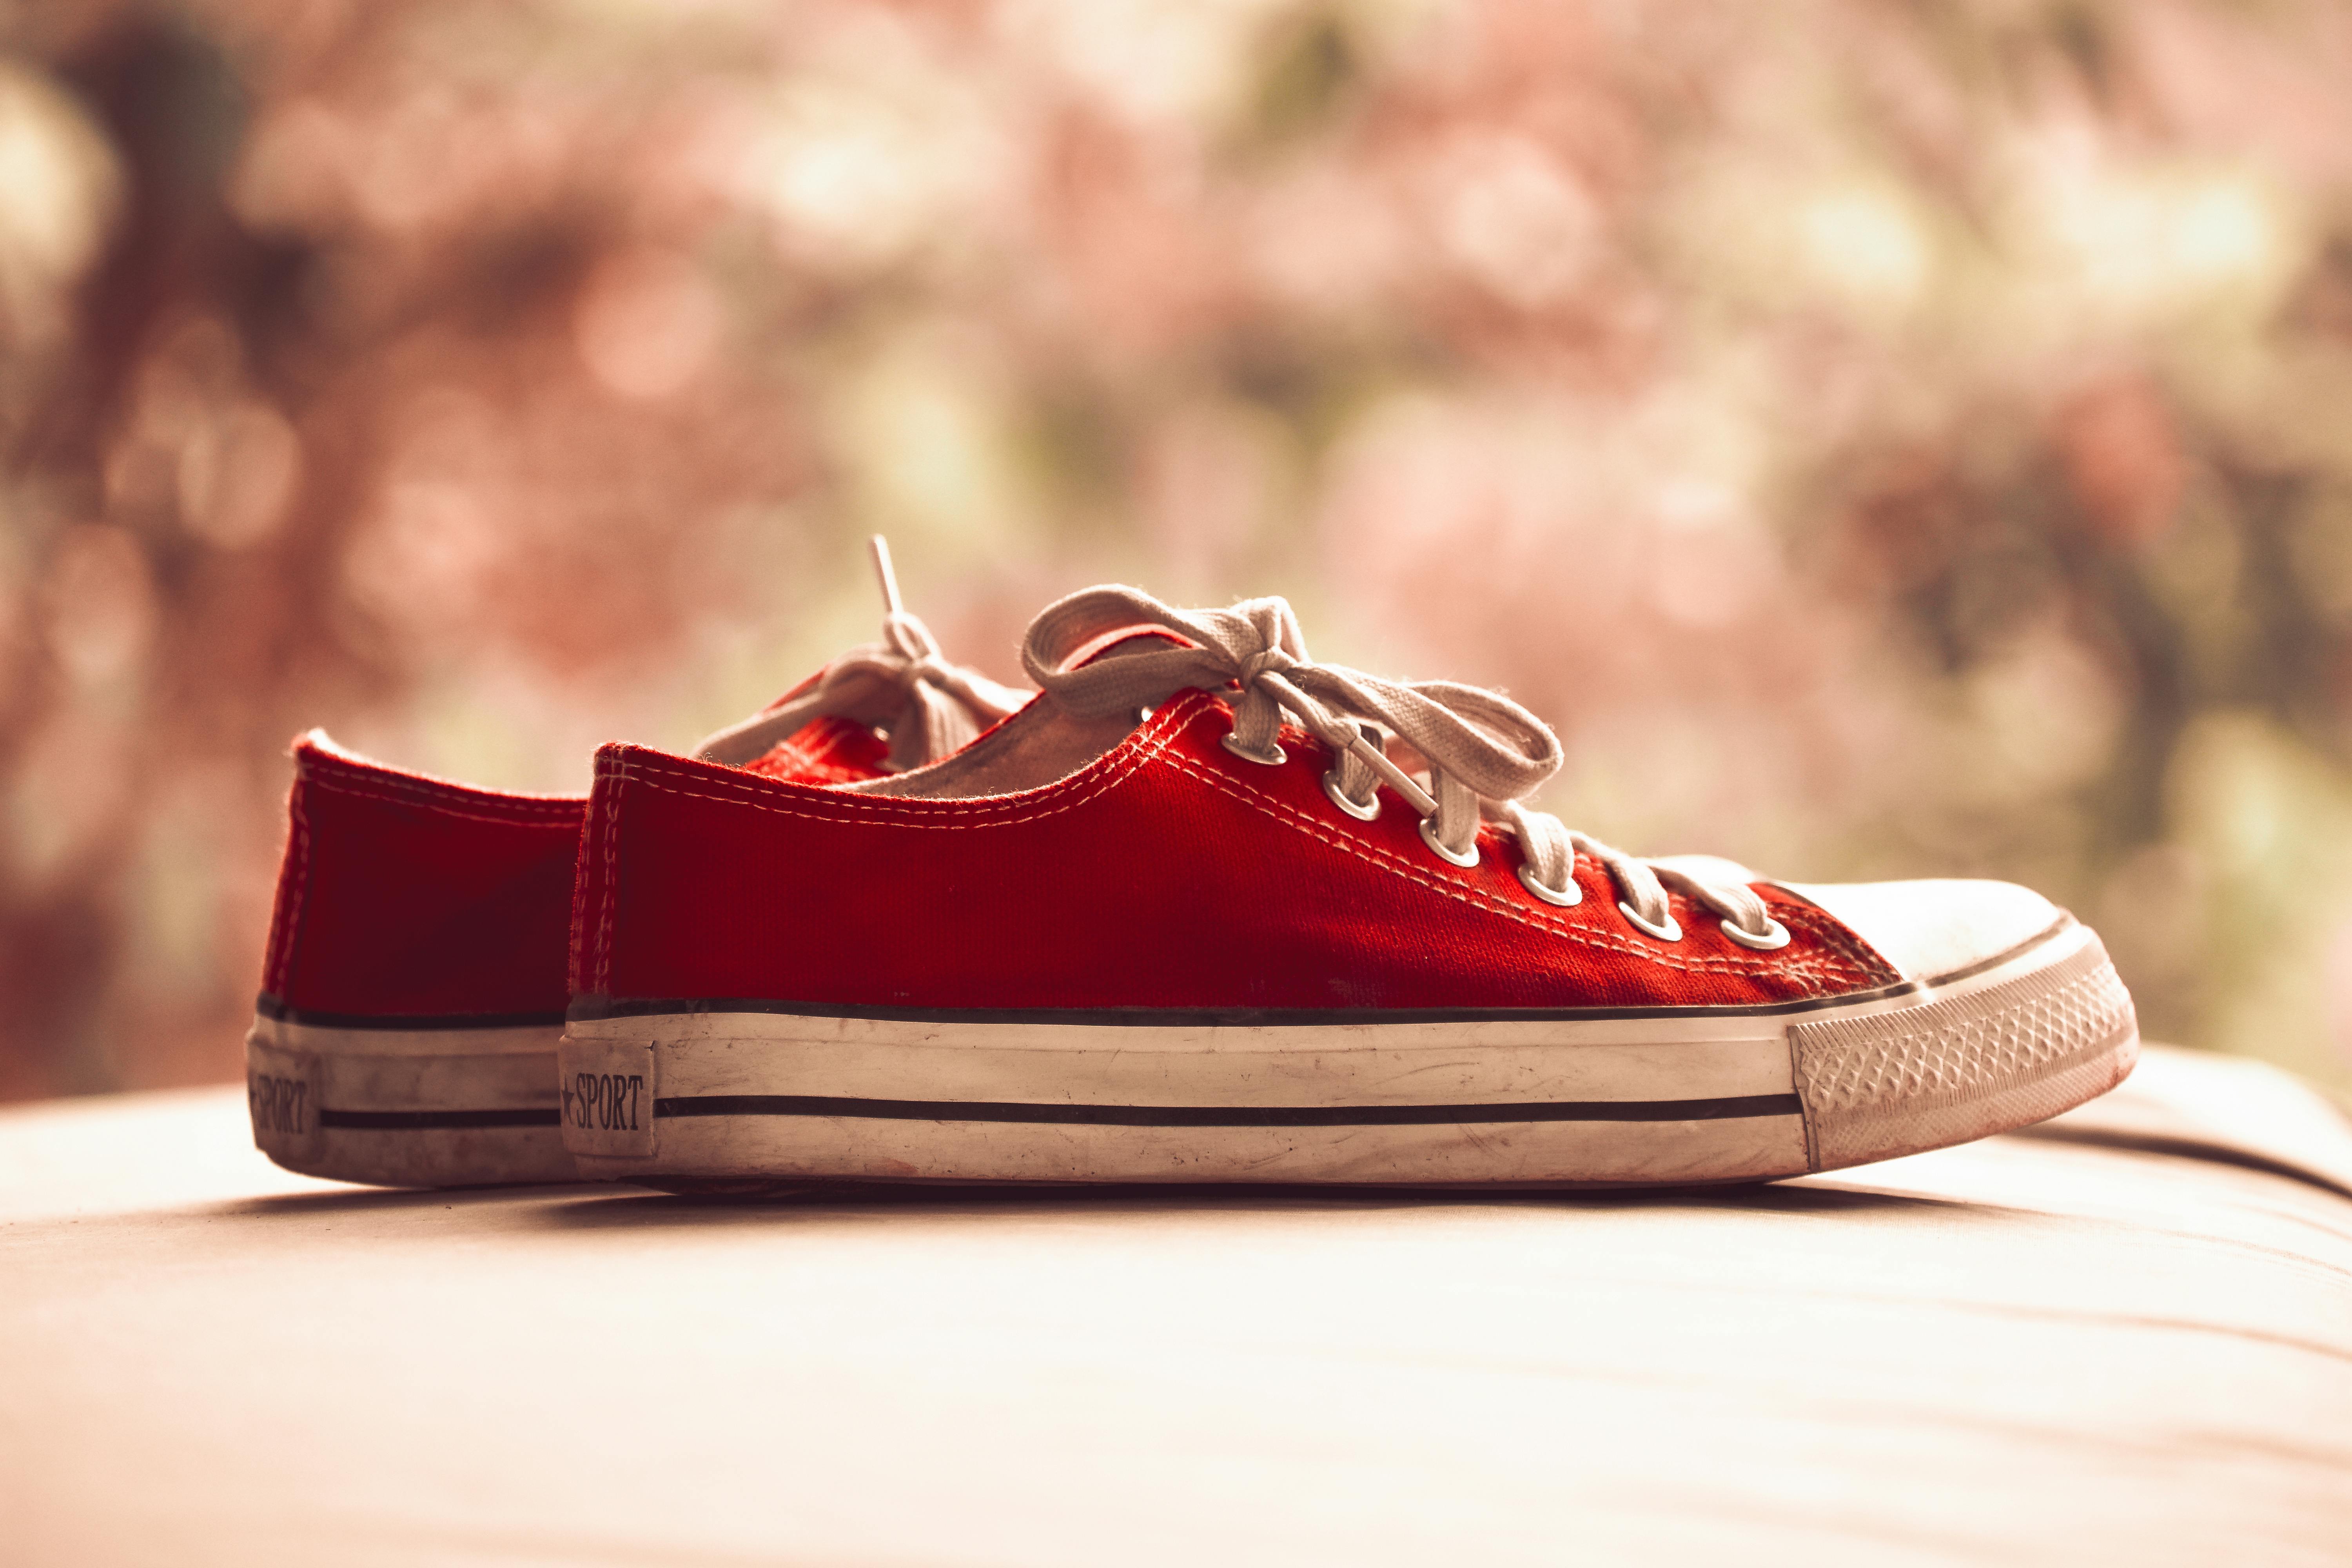 Pair of Red Low-top Sneakers in Bokeh Photography \u00b7 Free Stock Photo